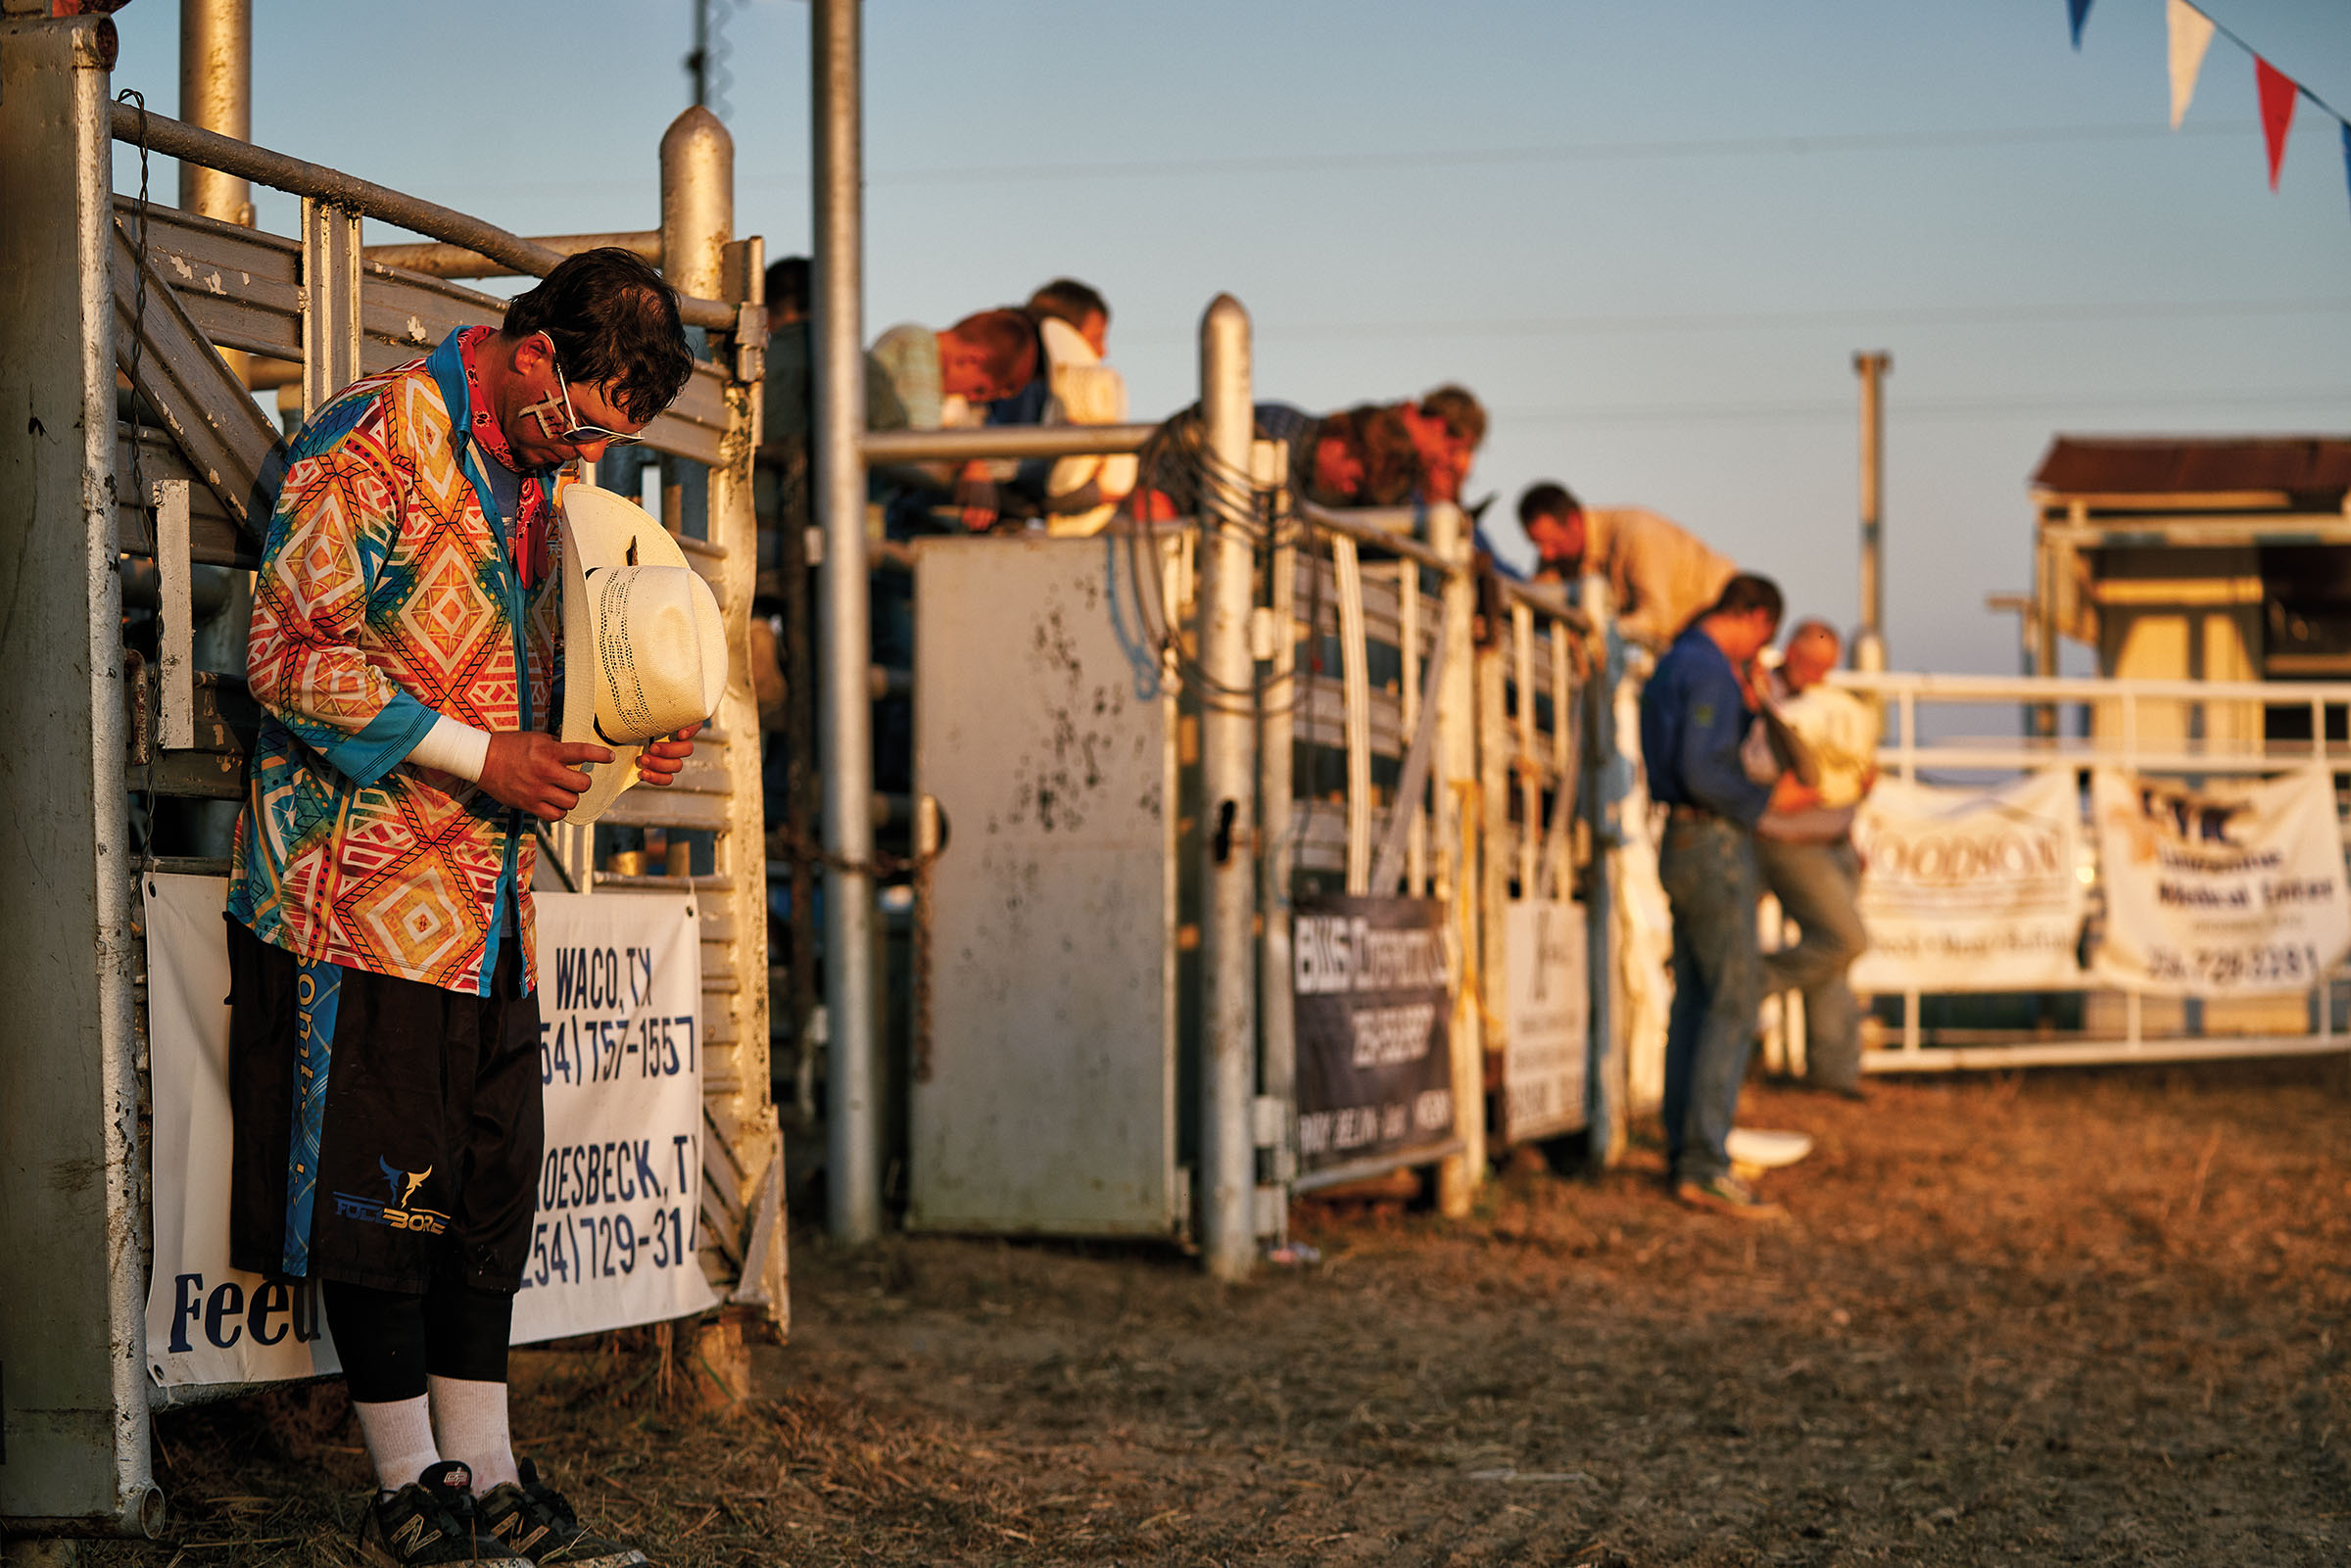 A group of rodeo clowns bow their heads and remove their hats in prayer